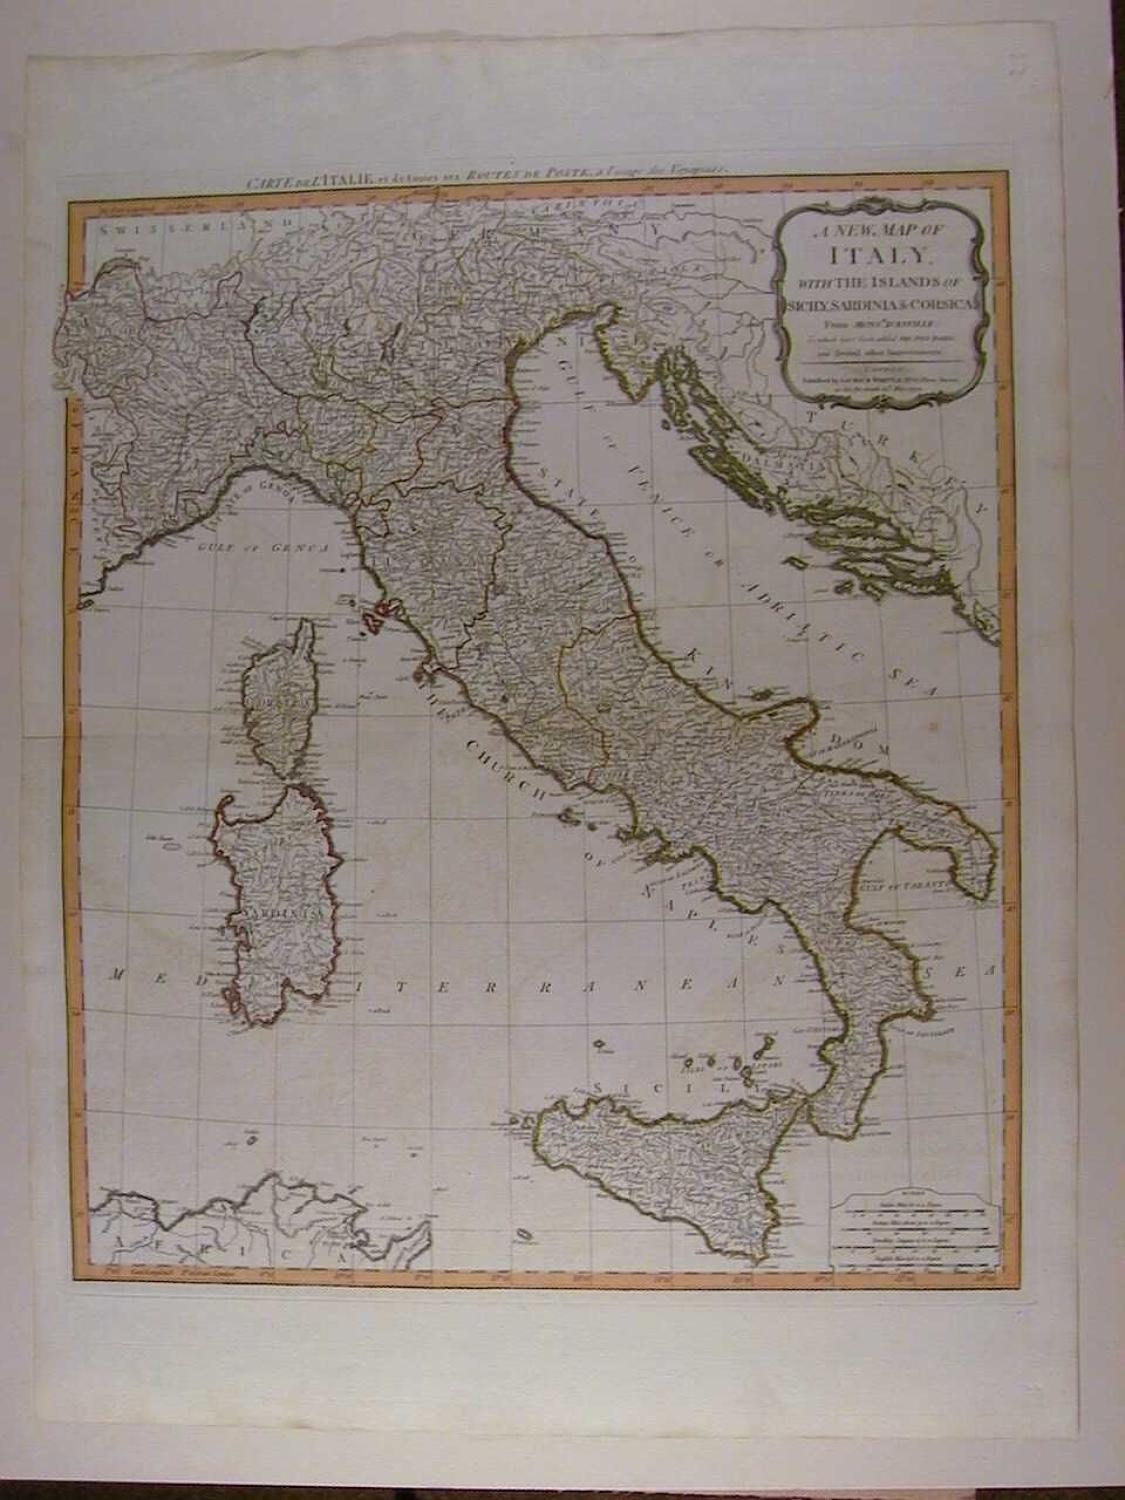 A New Map of Italy